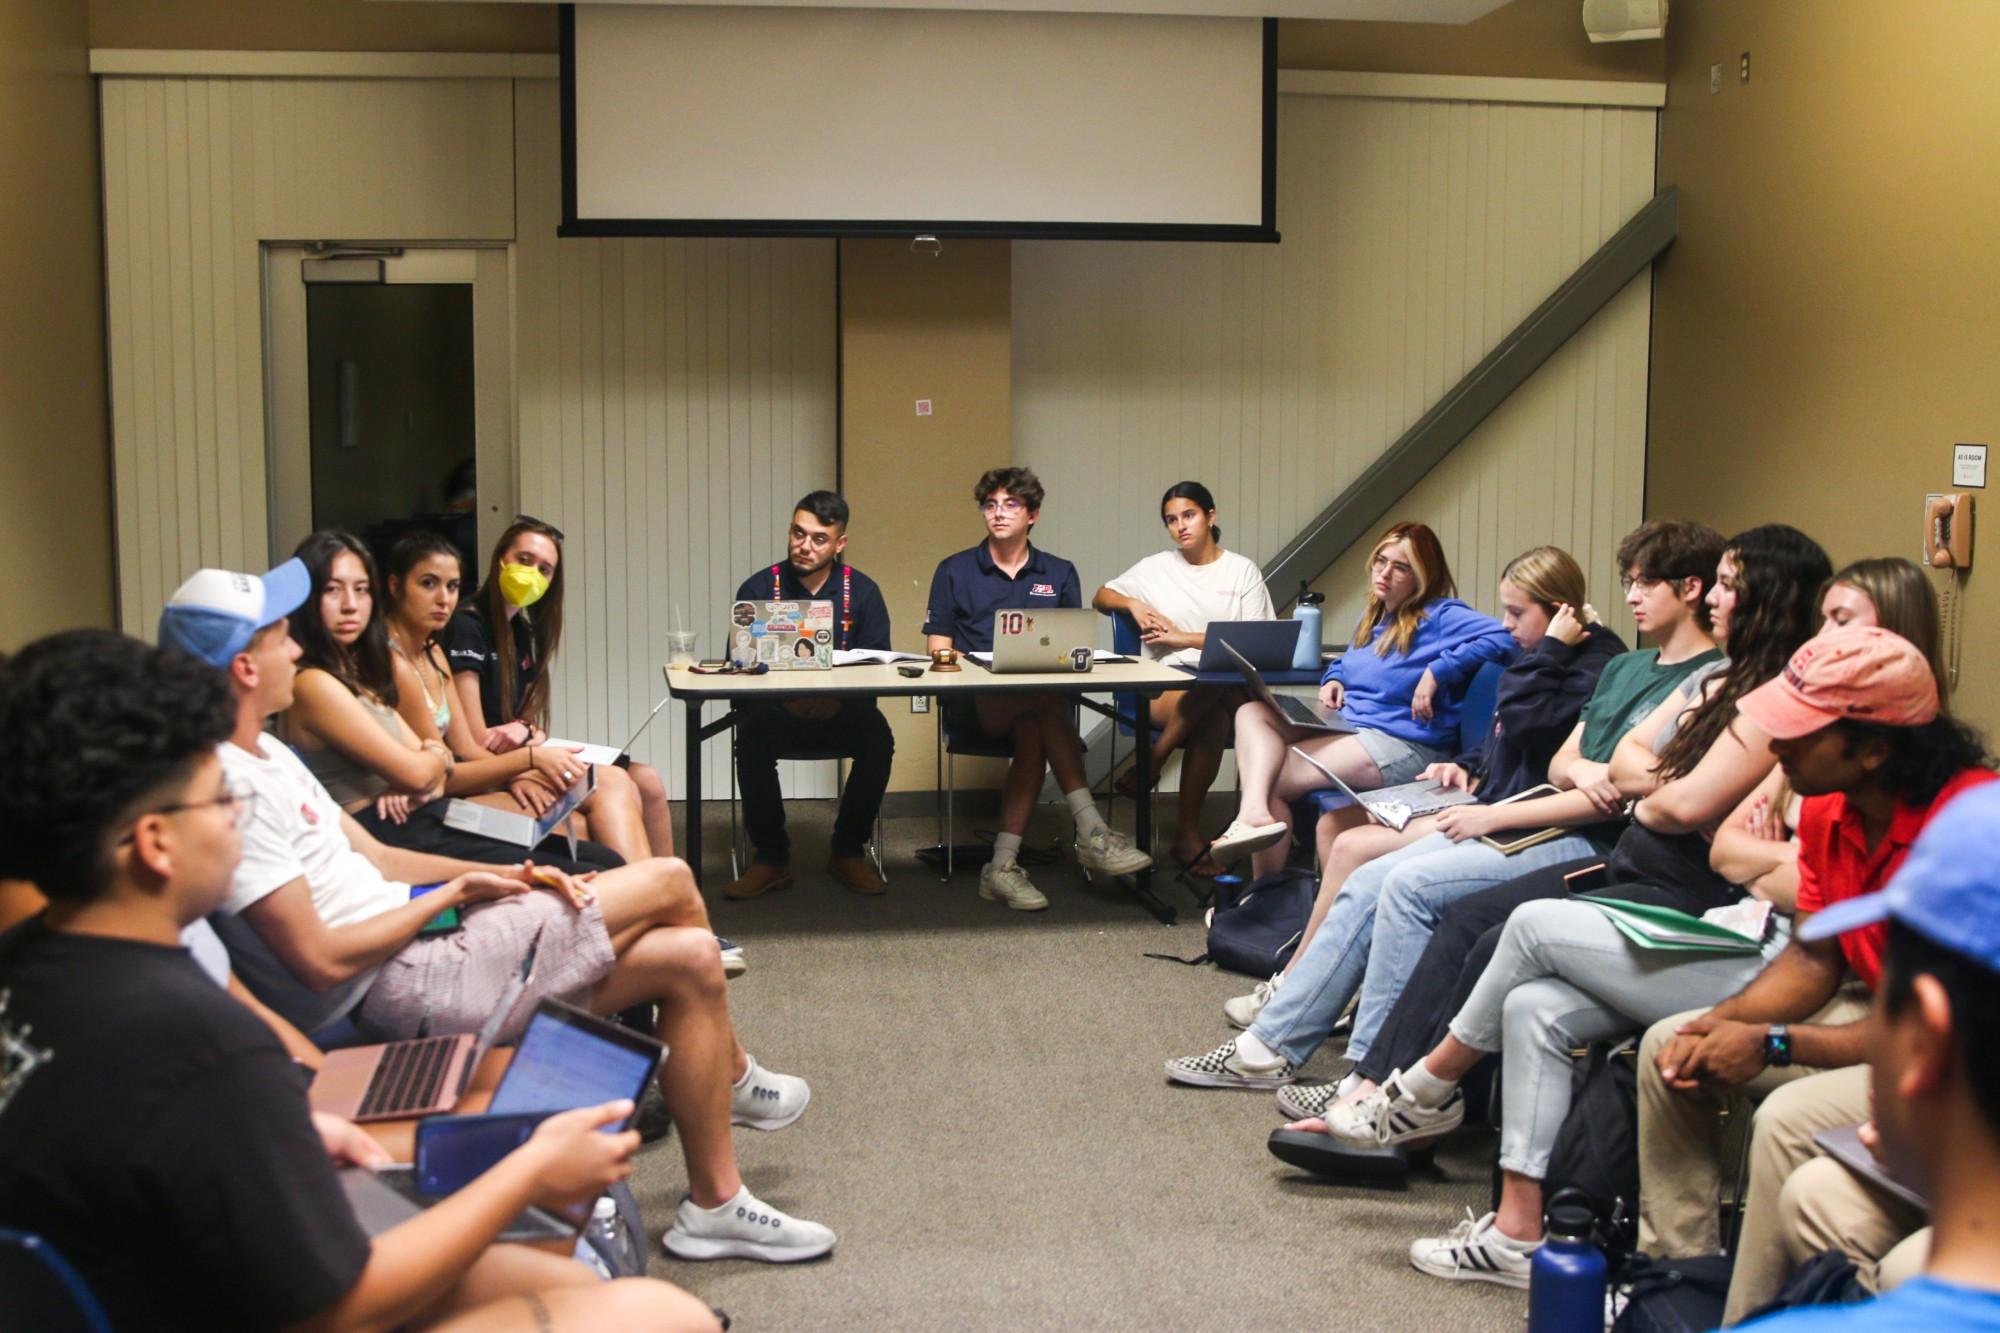 ASUA, the student government at the University of Arizona, has a meeting on Wednesday, Oct 12. They talked about mandatory meal plans and inequalities on campus.